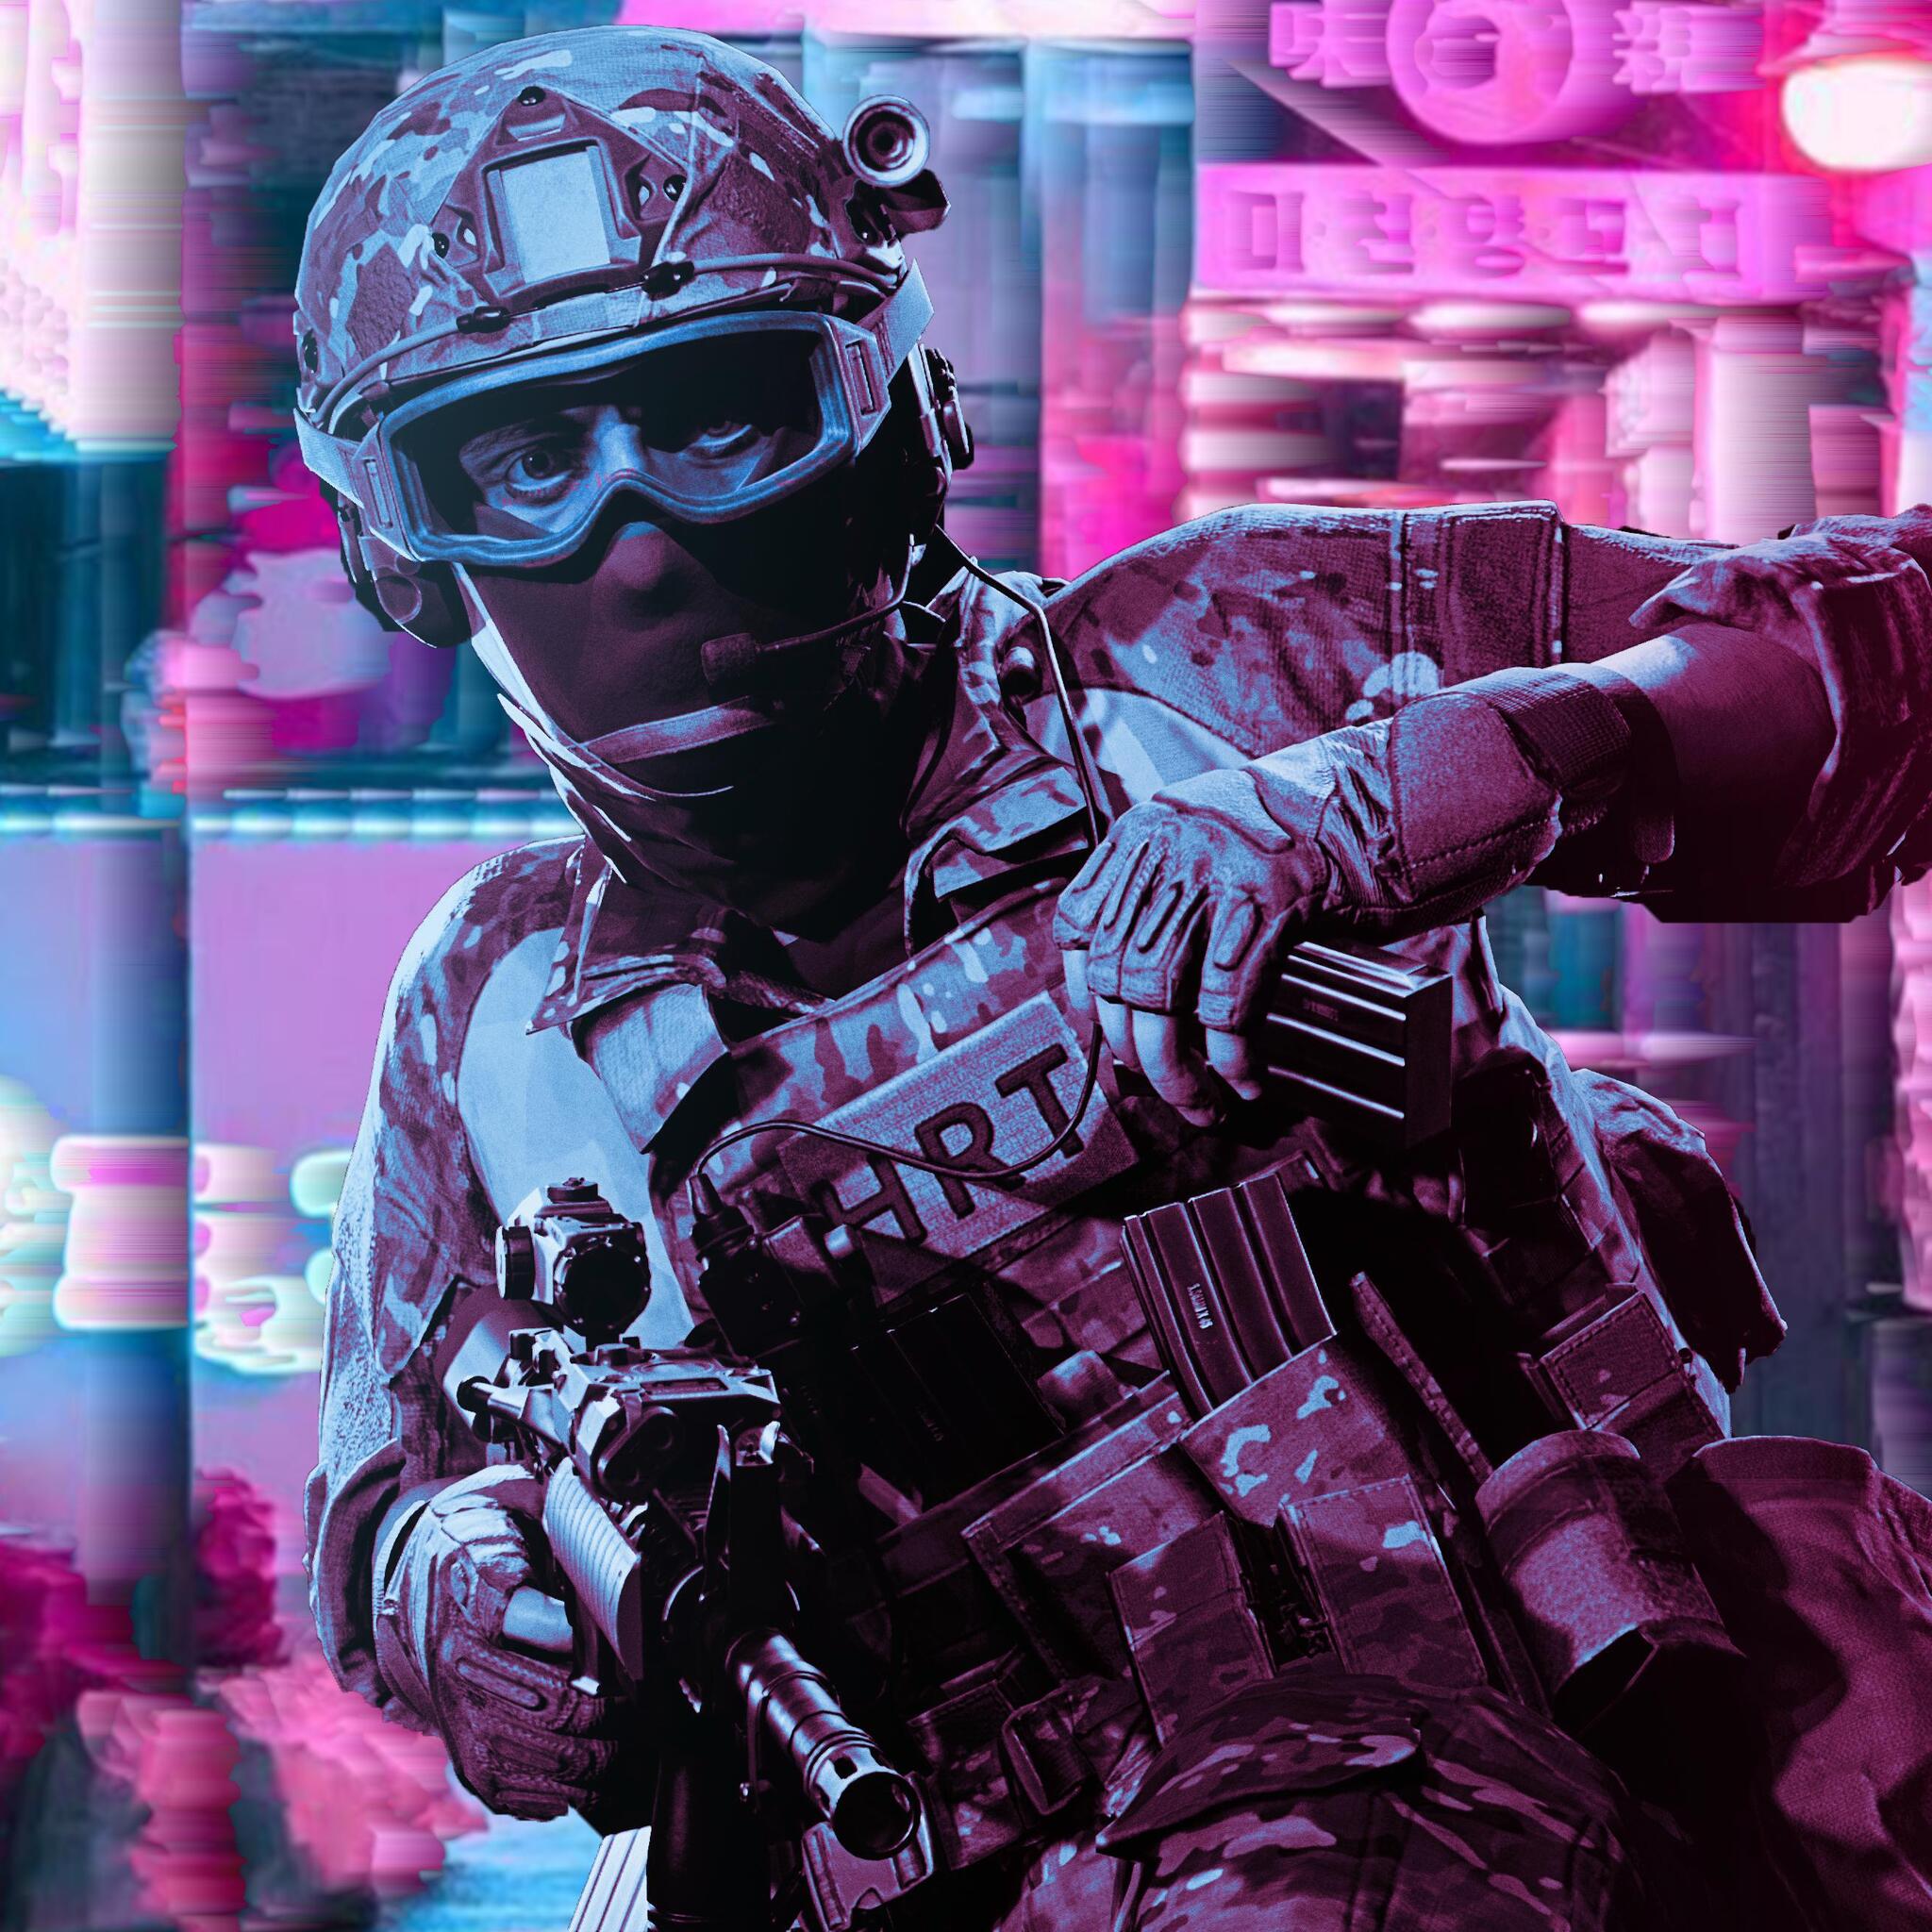 A soldier in full gear aims a gun at a pink and purple neon-lit cityscape. - Glitch